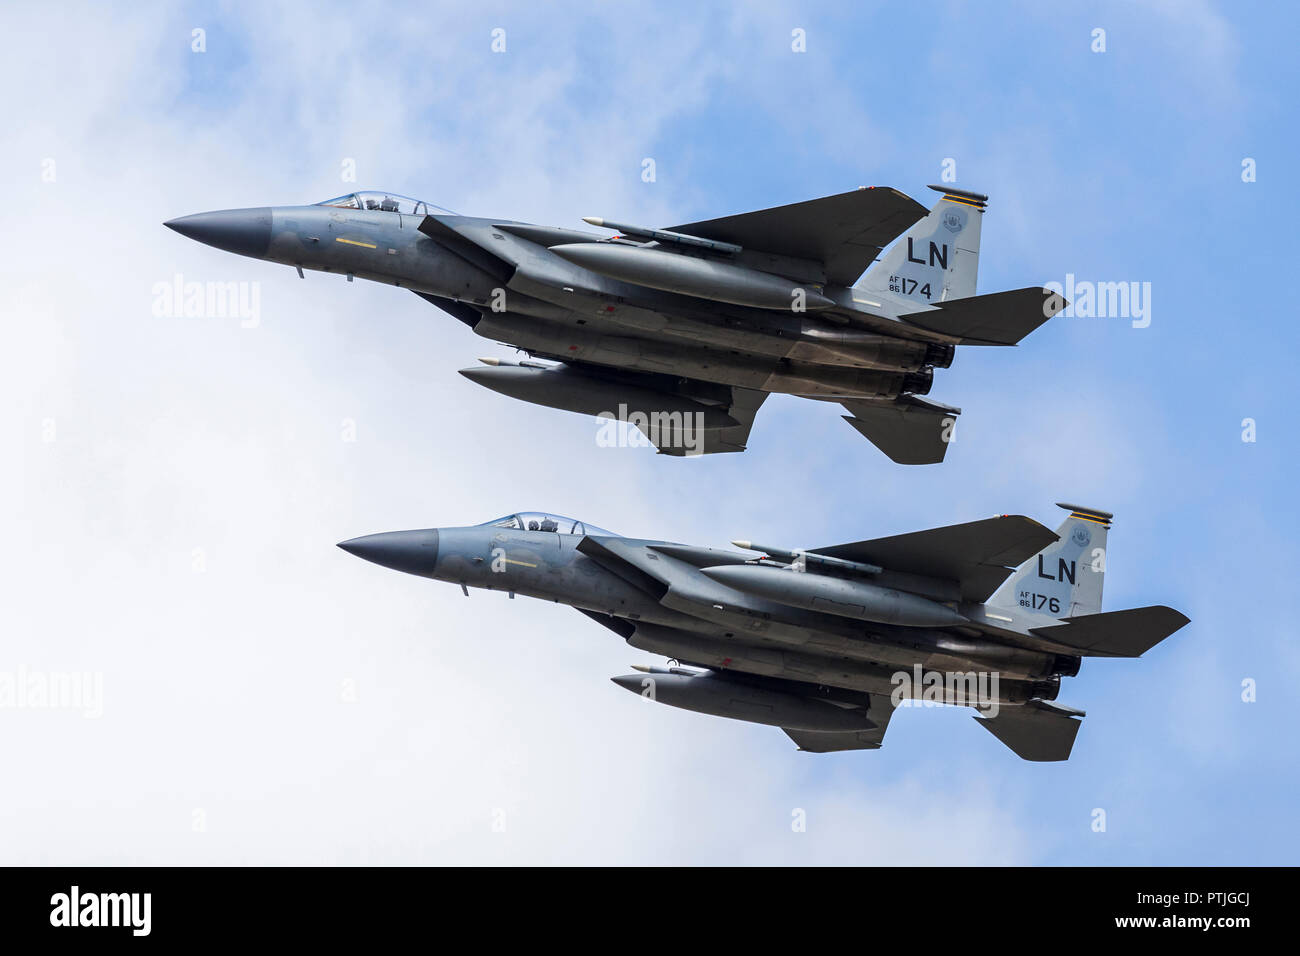 Pair of F-15C Eagles from the USAF during a flypast. Stock Photo